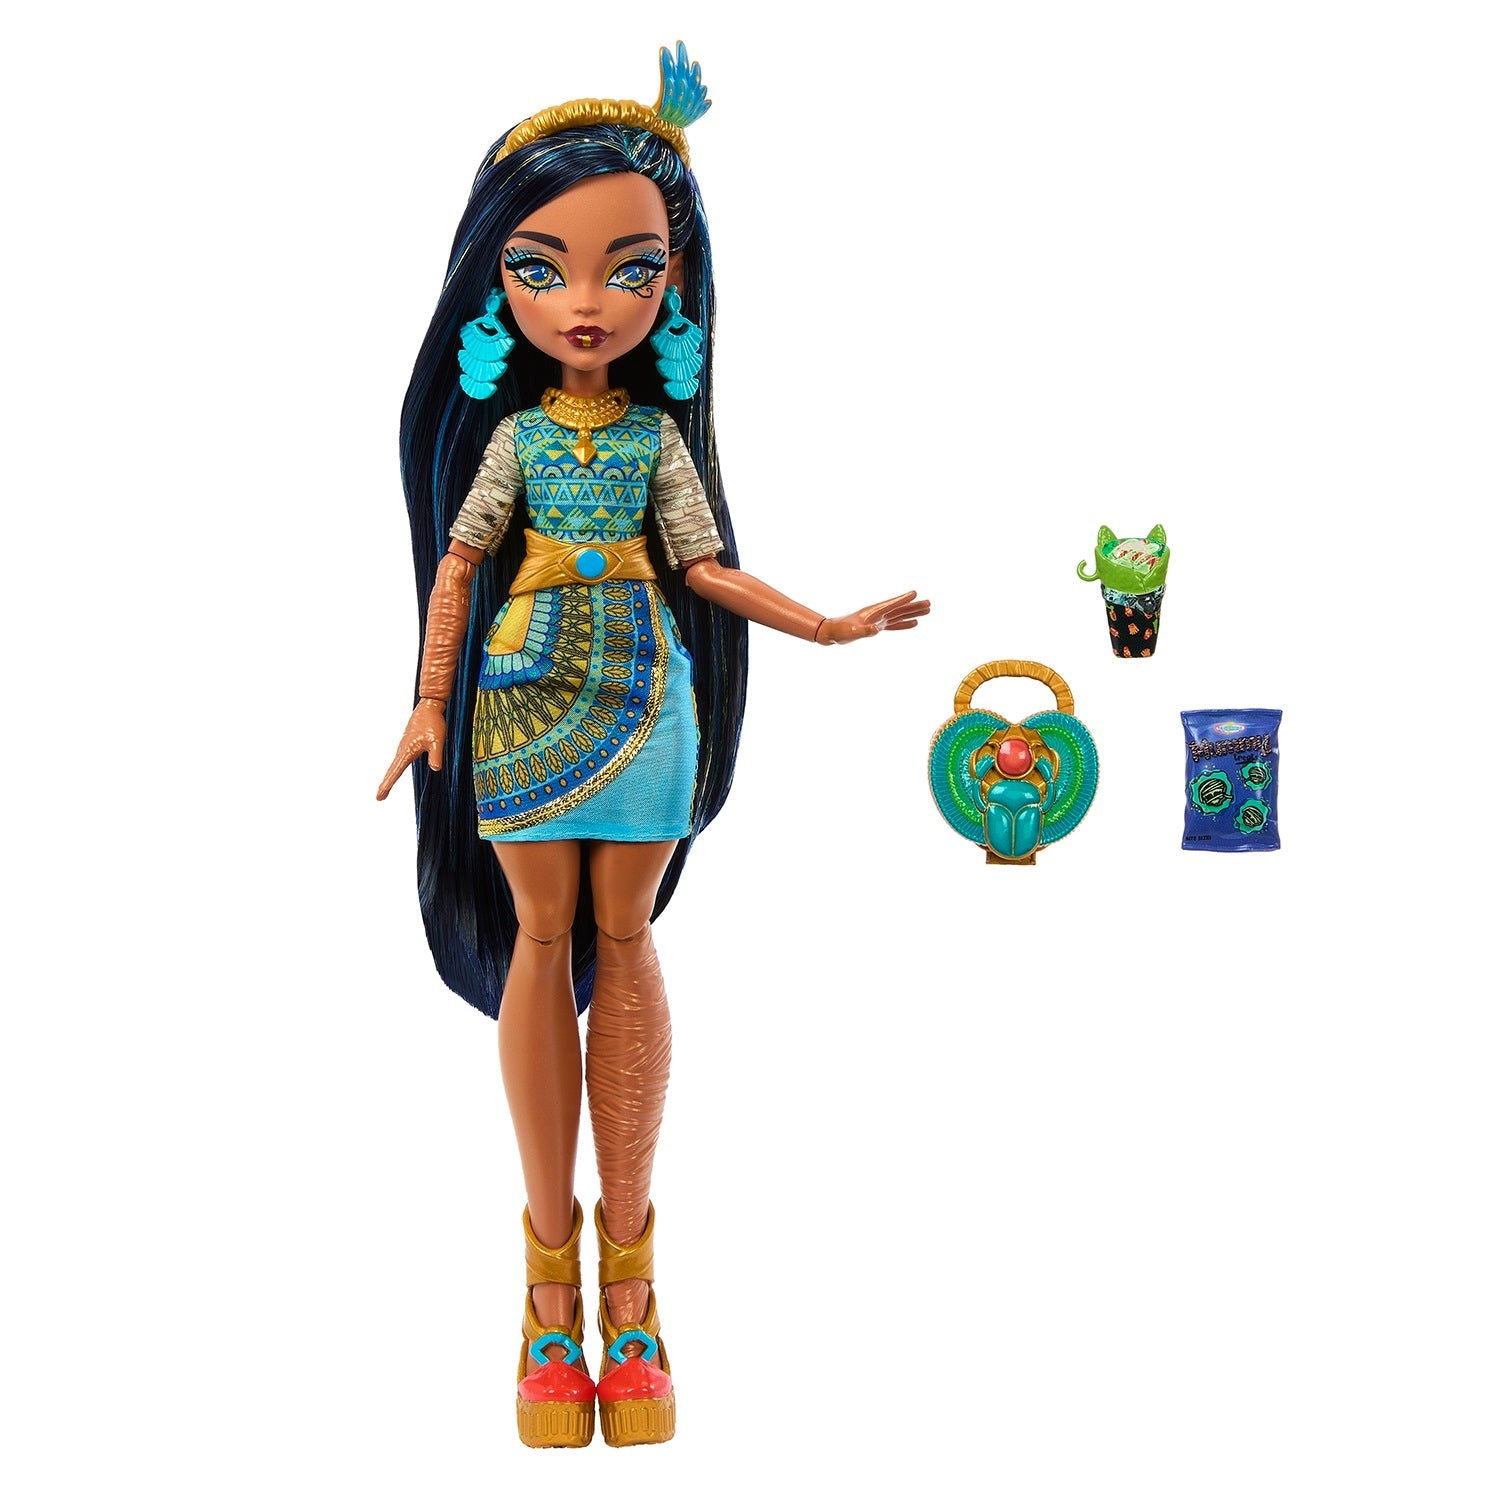 Monster High Cleo De Nile Doll shown with accessories